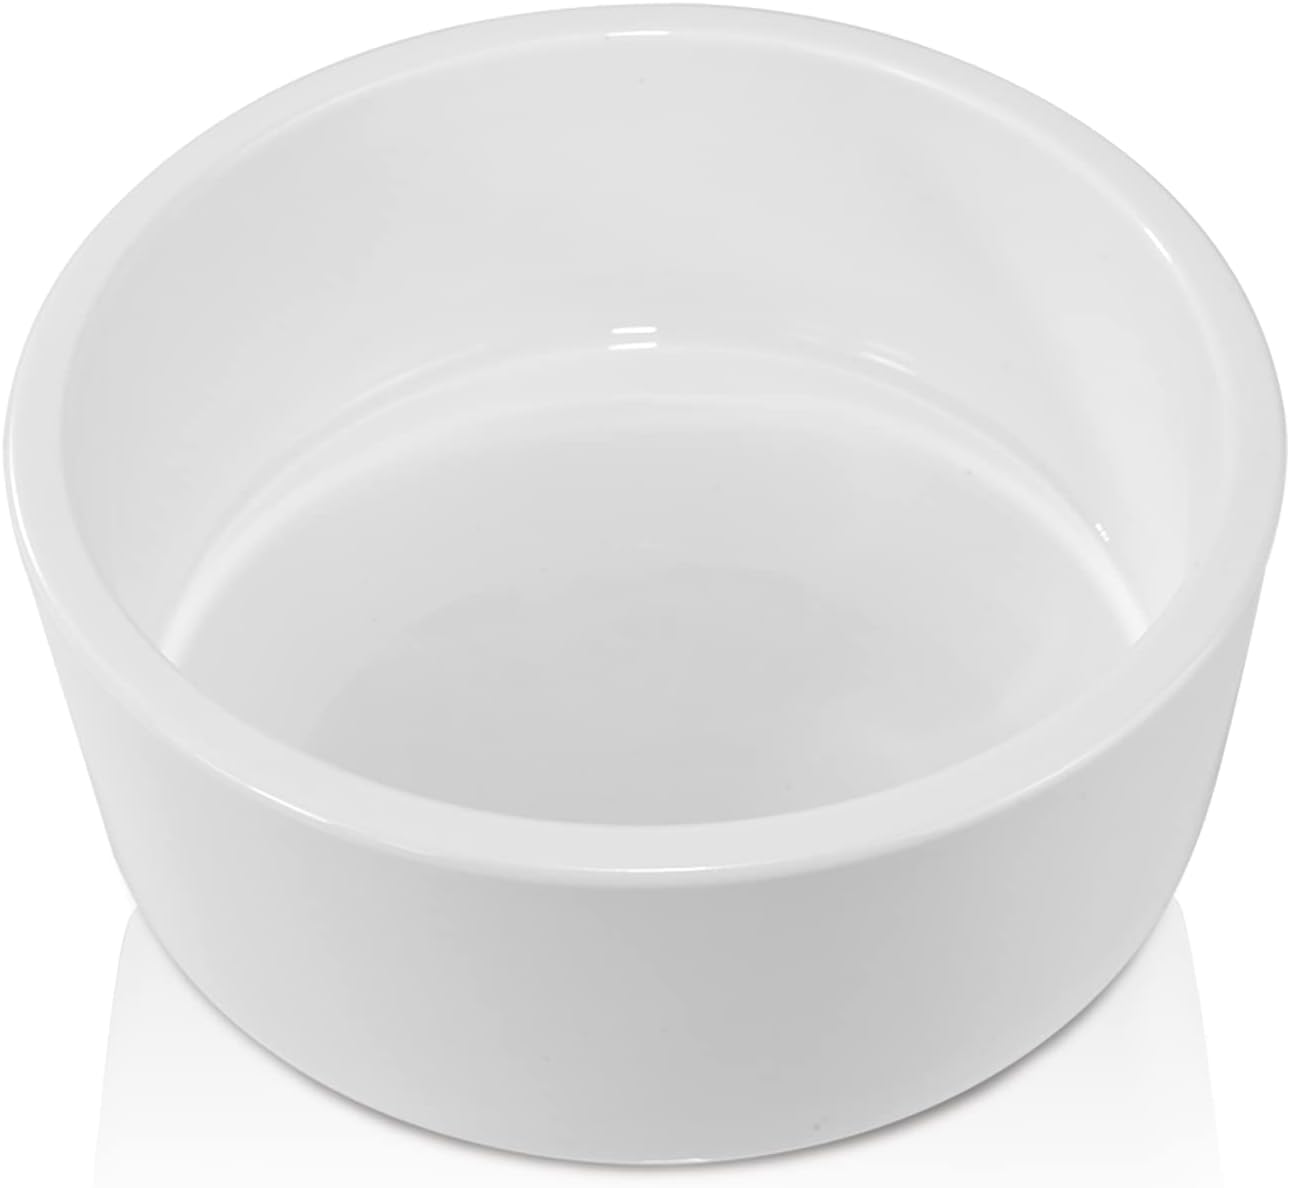 12 PACK- Large Sublimation Pet bowl 7 x 3 inches with AAA Coating -  | Reinforced Styrofoam Packaging"